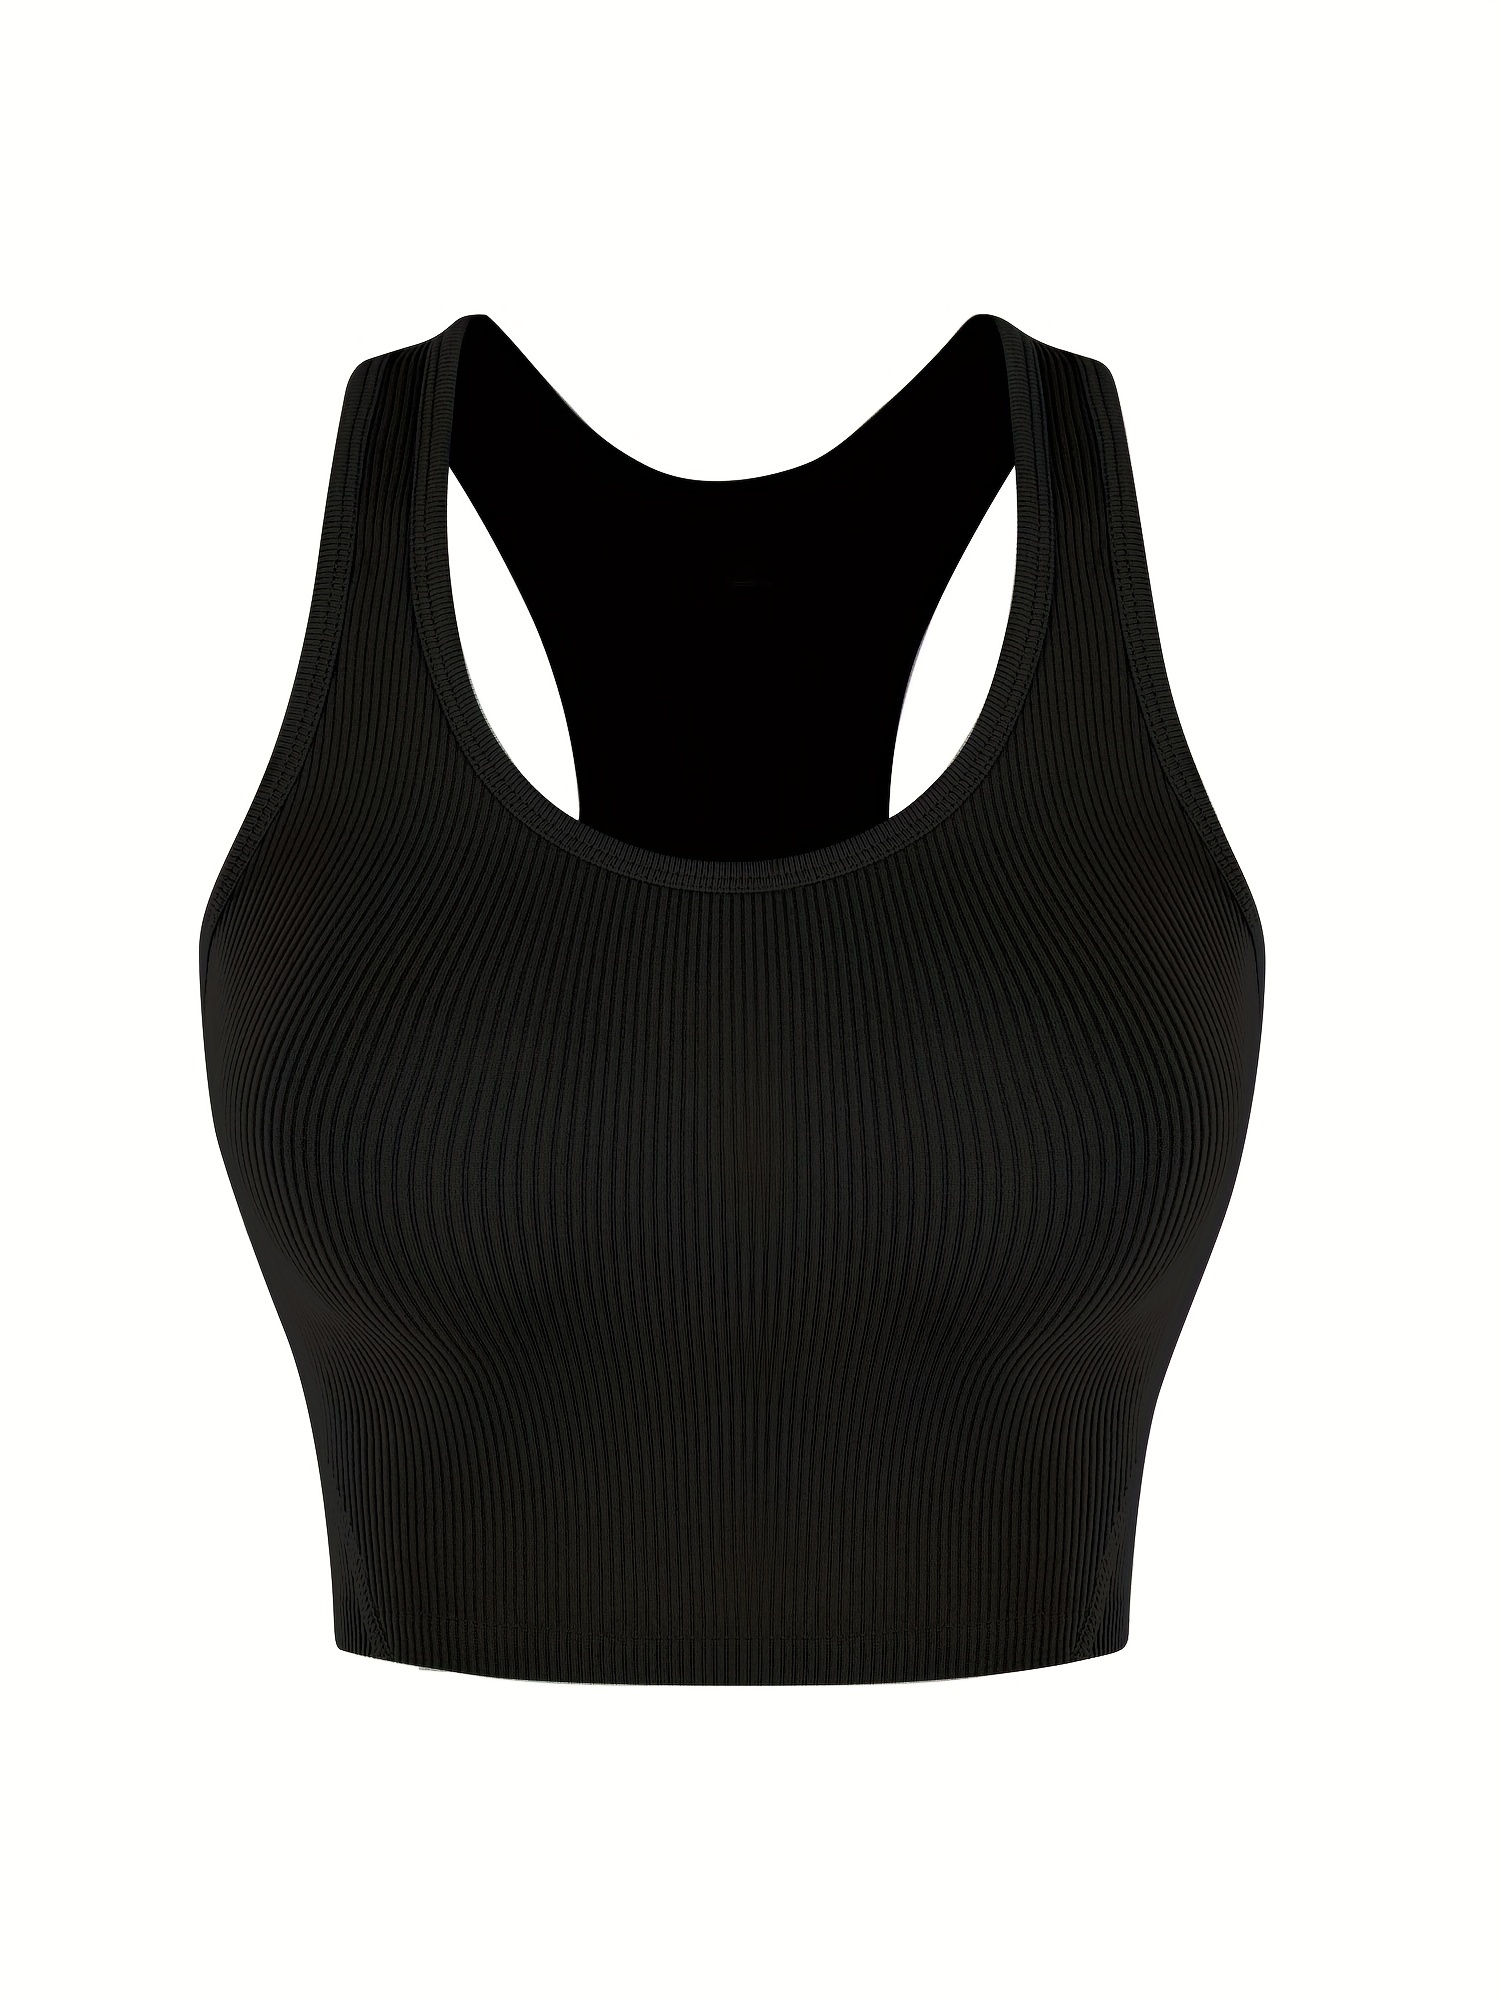 Buy ATTRACO Women Ribbed Workout Crop Tops with Built in Bra Yoga Racerback Tank  Top Tight Fit, Black, 6 at